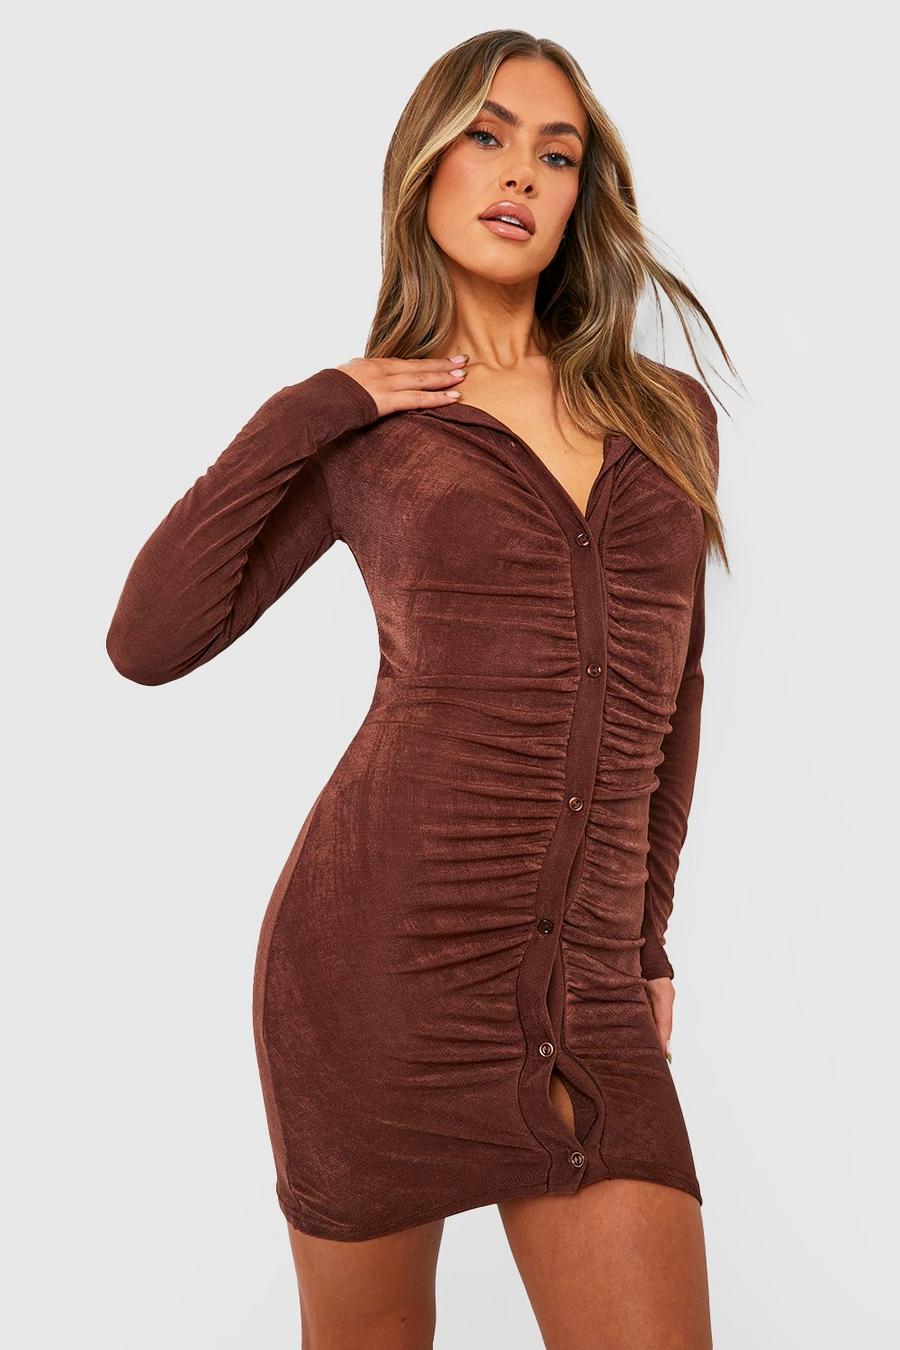 Chocolate Acetate Slinky Ruched Button Through Mini Dress